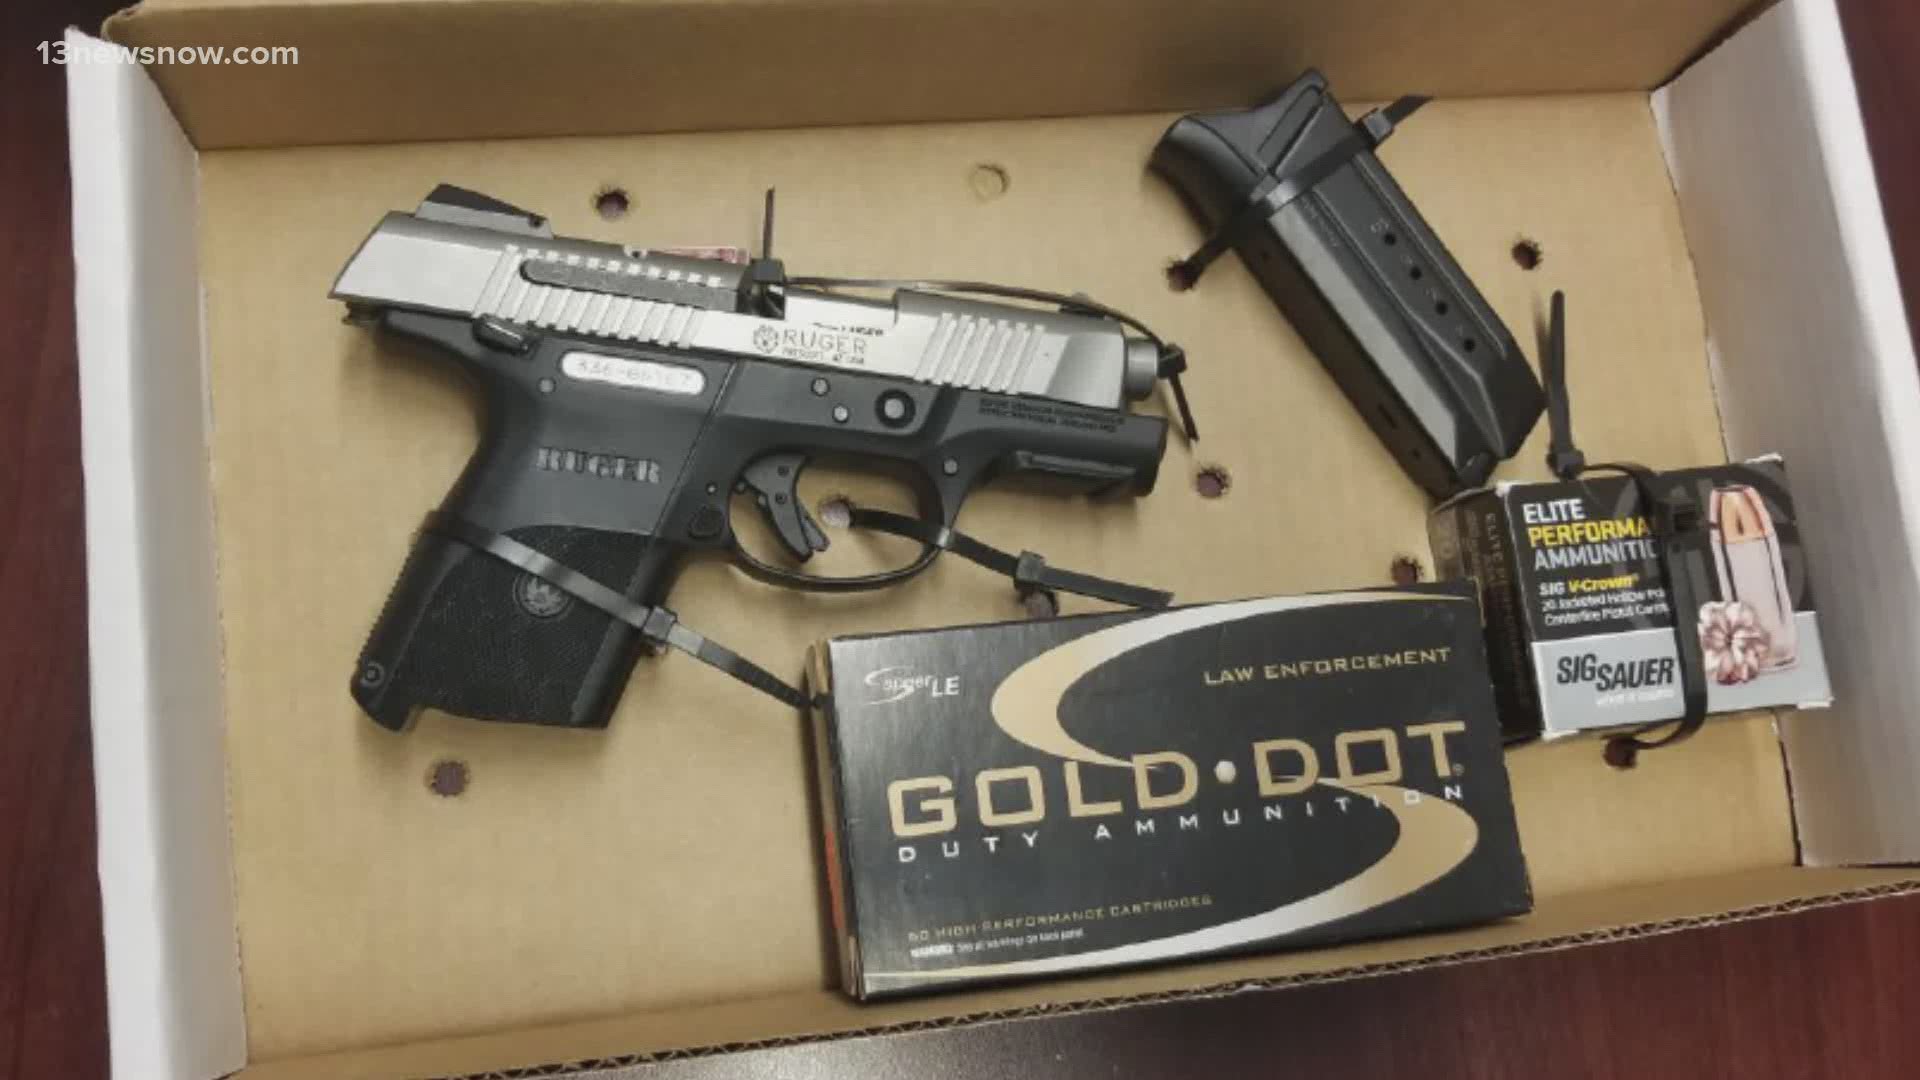 Officials said a woman was detained after she brought a 9mm handgun and two boxes of ammunition onto a Norfolk International Airport plane on March 18.